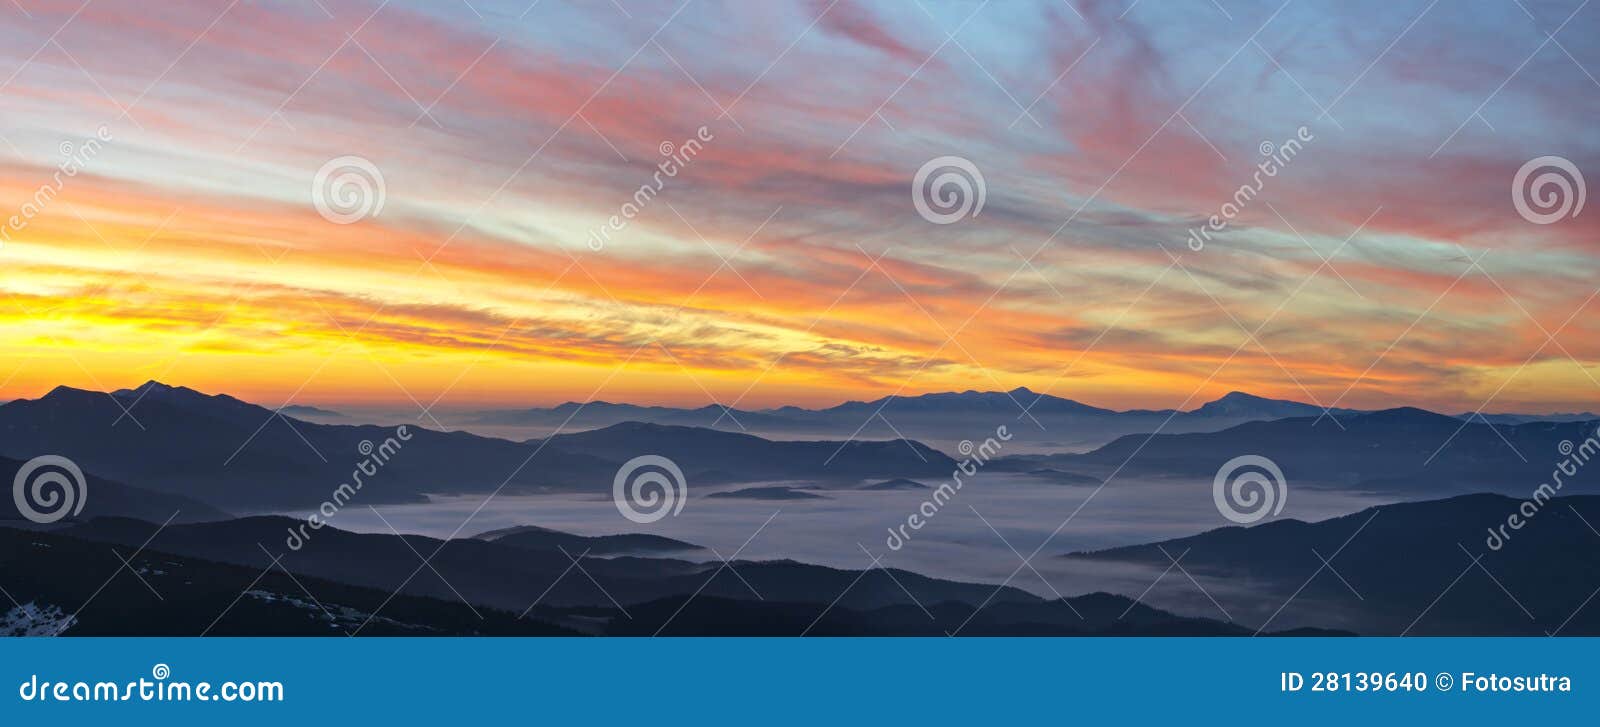 mountains and dawn sky